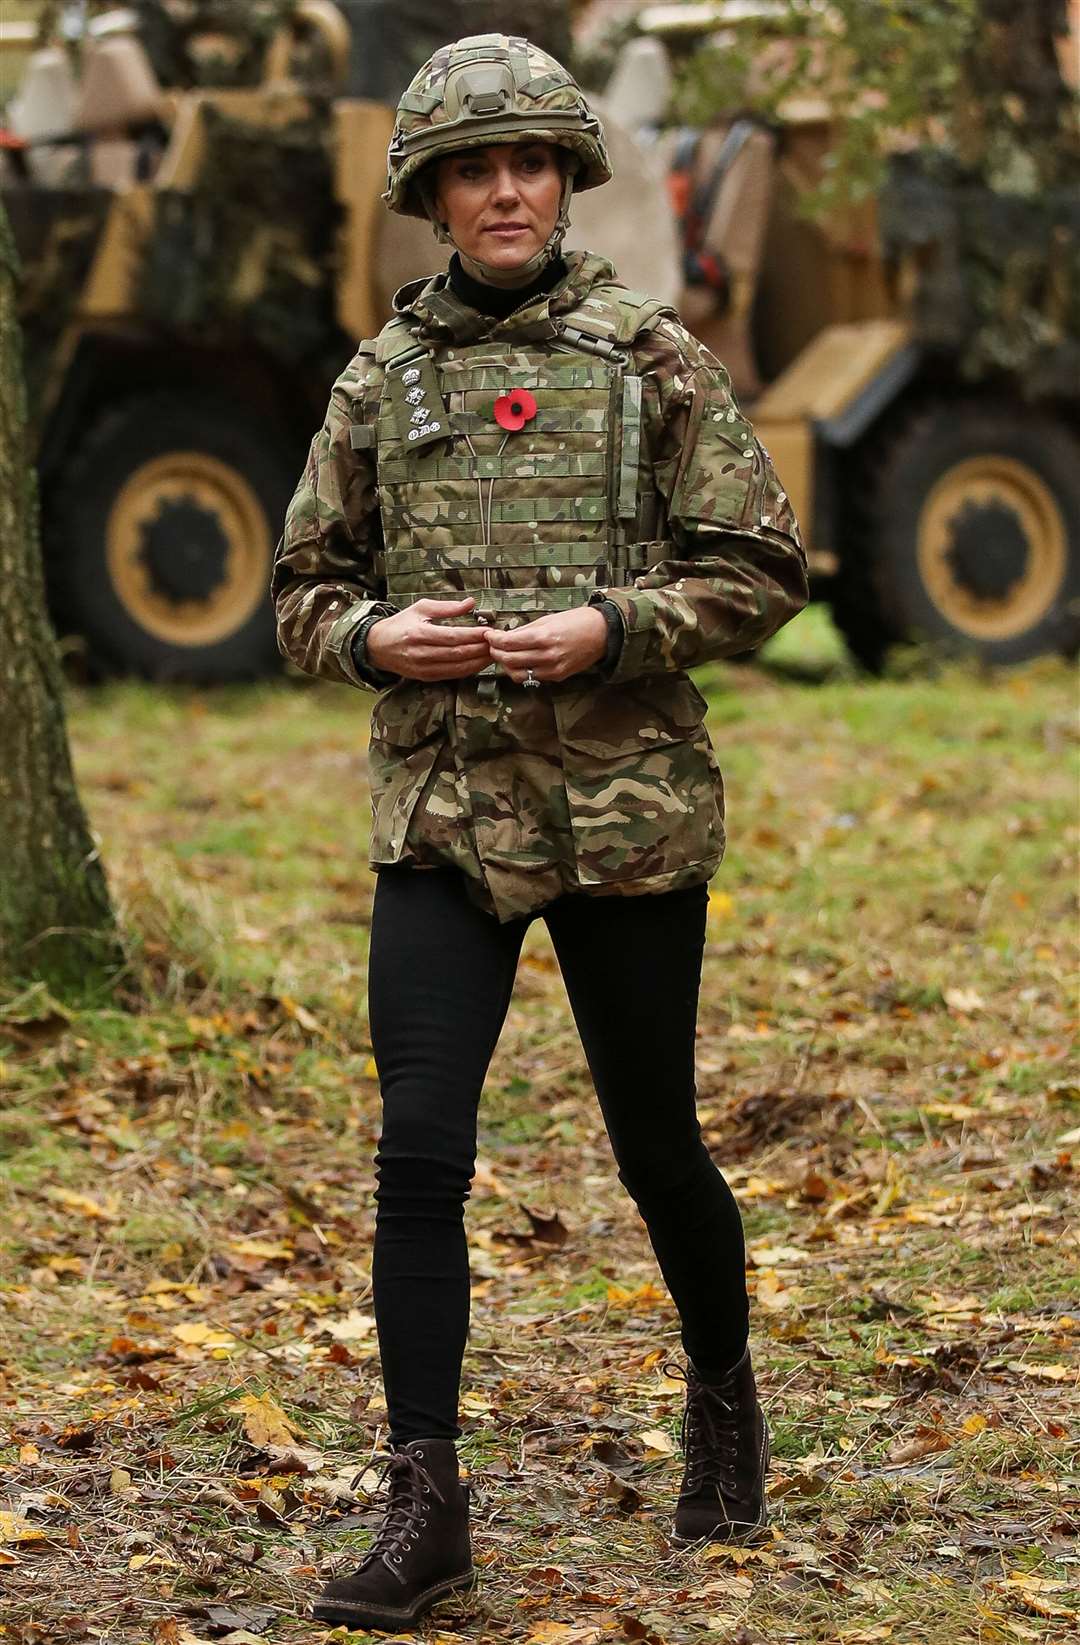 The Princess of Wales in November during her first visit to 1st The Queen’s Dragoon Guards at Robertson Barracks, Dereham, Norfolk, since being appointed Colonel-in-Chief by the King in August (Chris Radburn/PA)